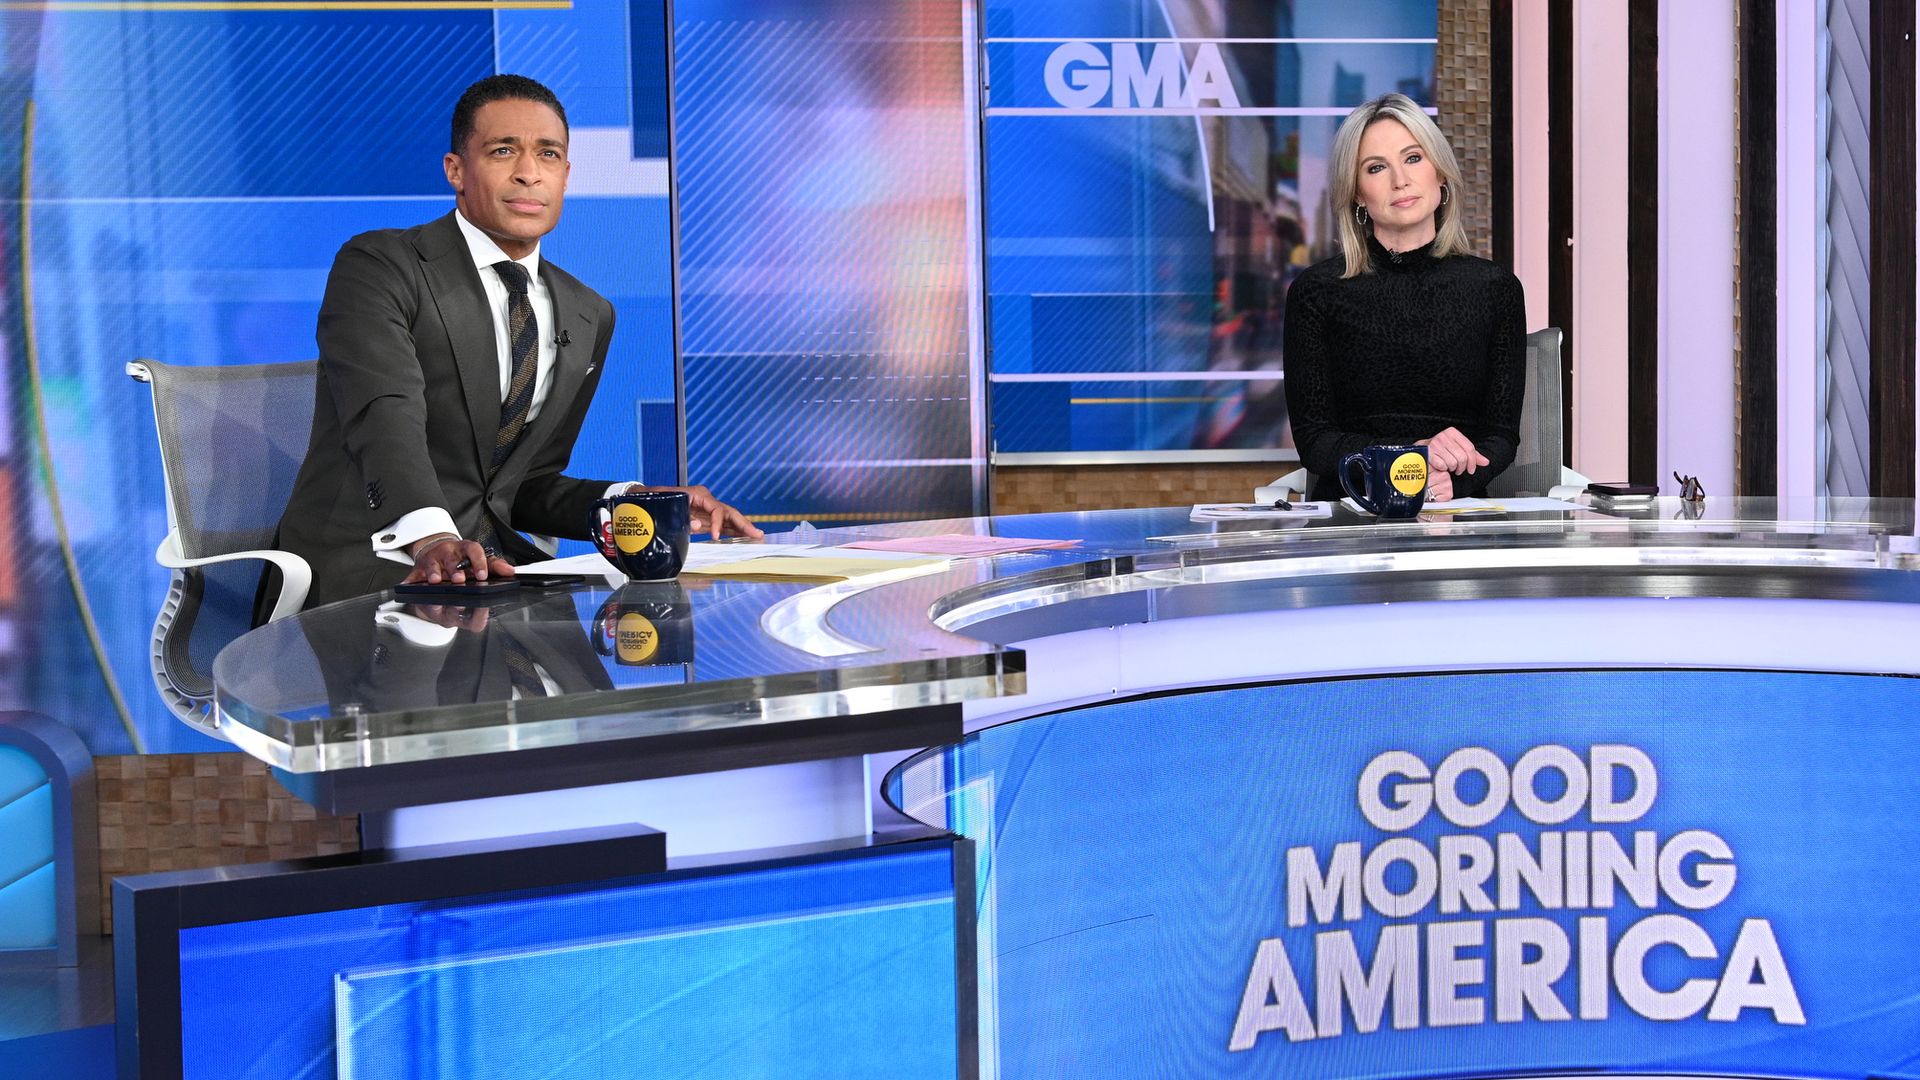 Amy and T.J. sat at the GMA desk